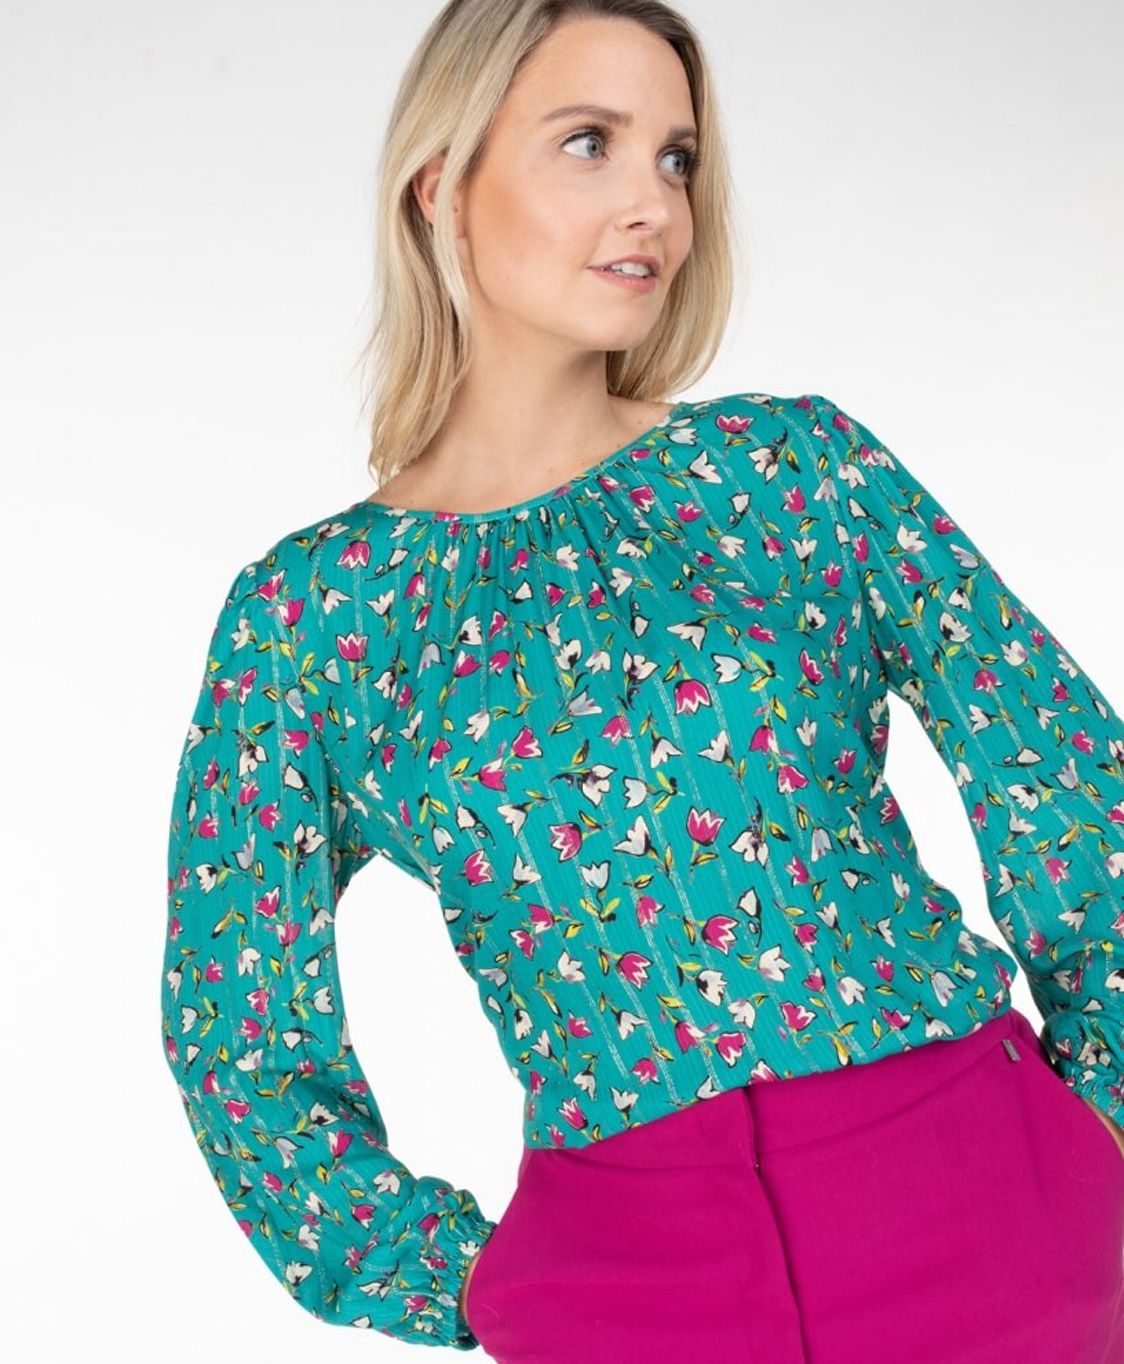 Anna Van Toor Blouse 26a05-03217 turquoise